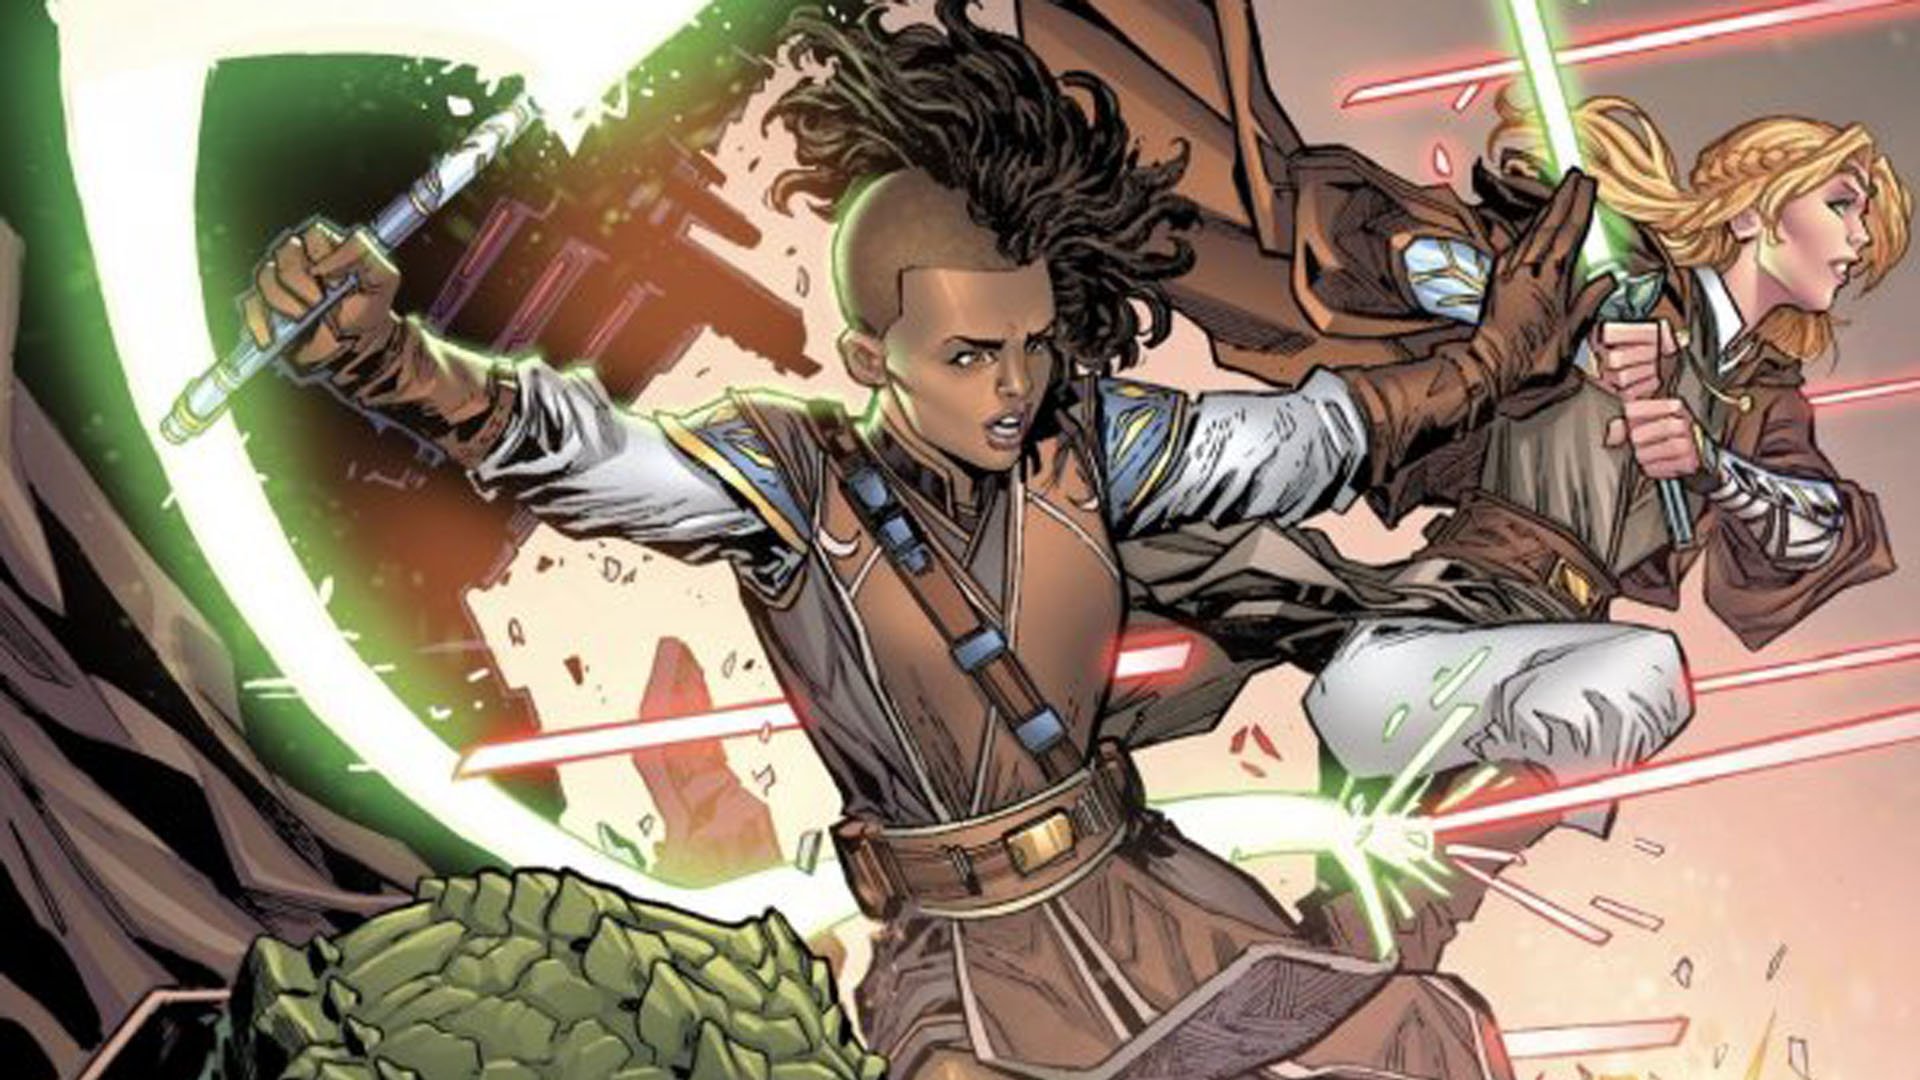 The Jedi And Hutts In Bizarre Marvel Team Up With Bizarre Star Wars: The High Republic Preview